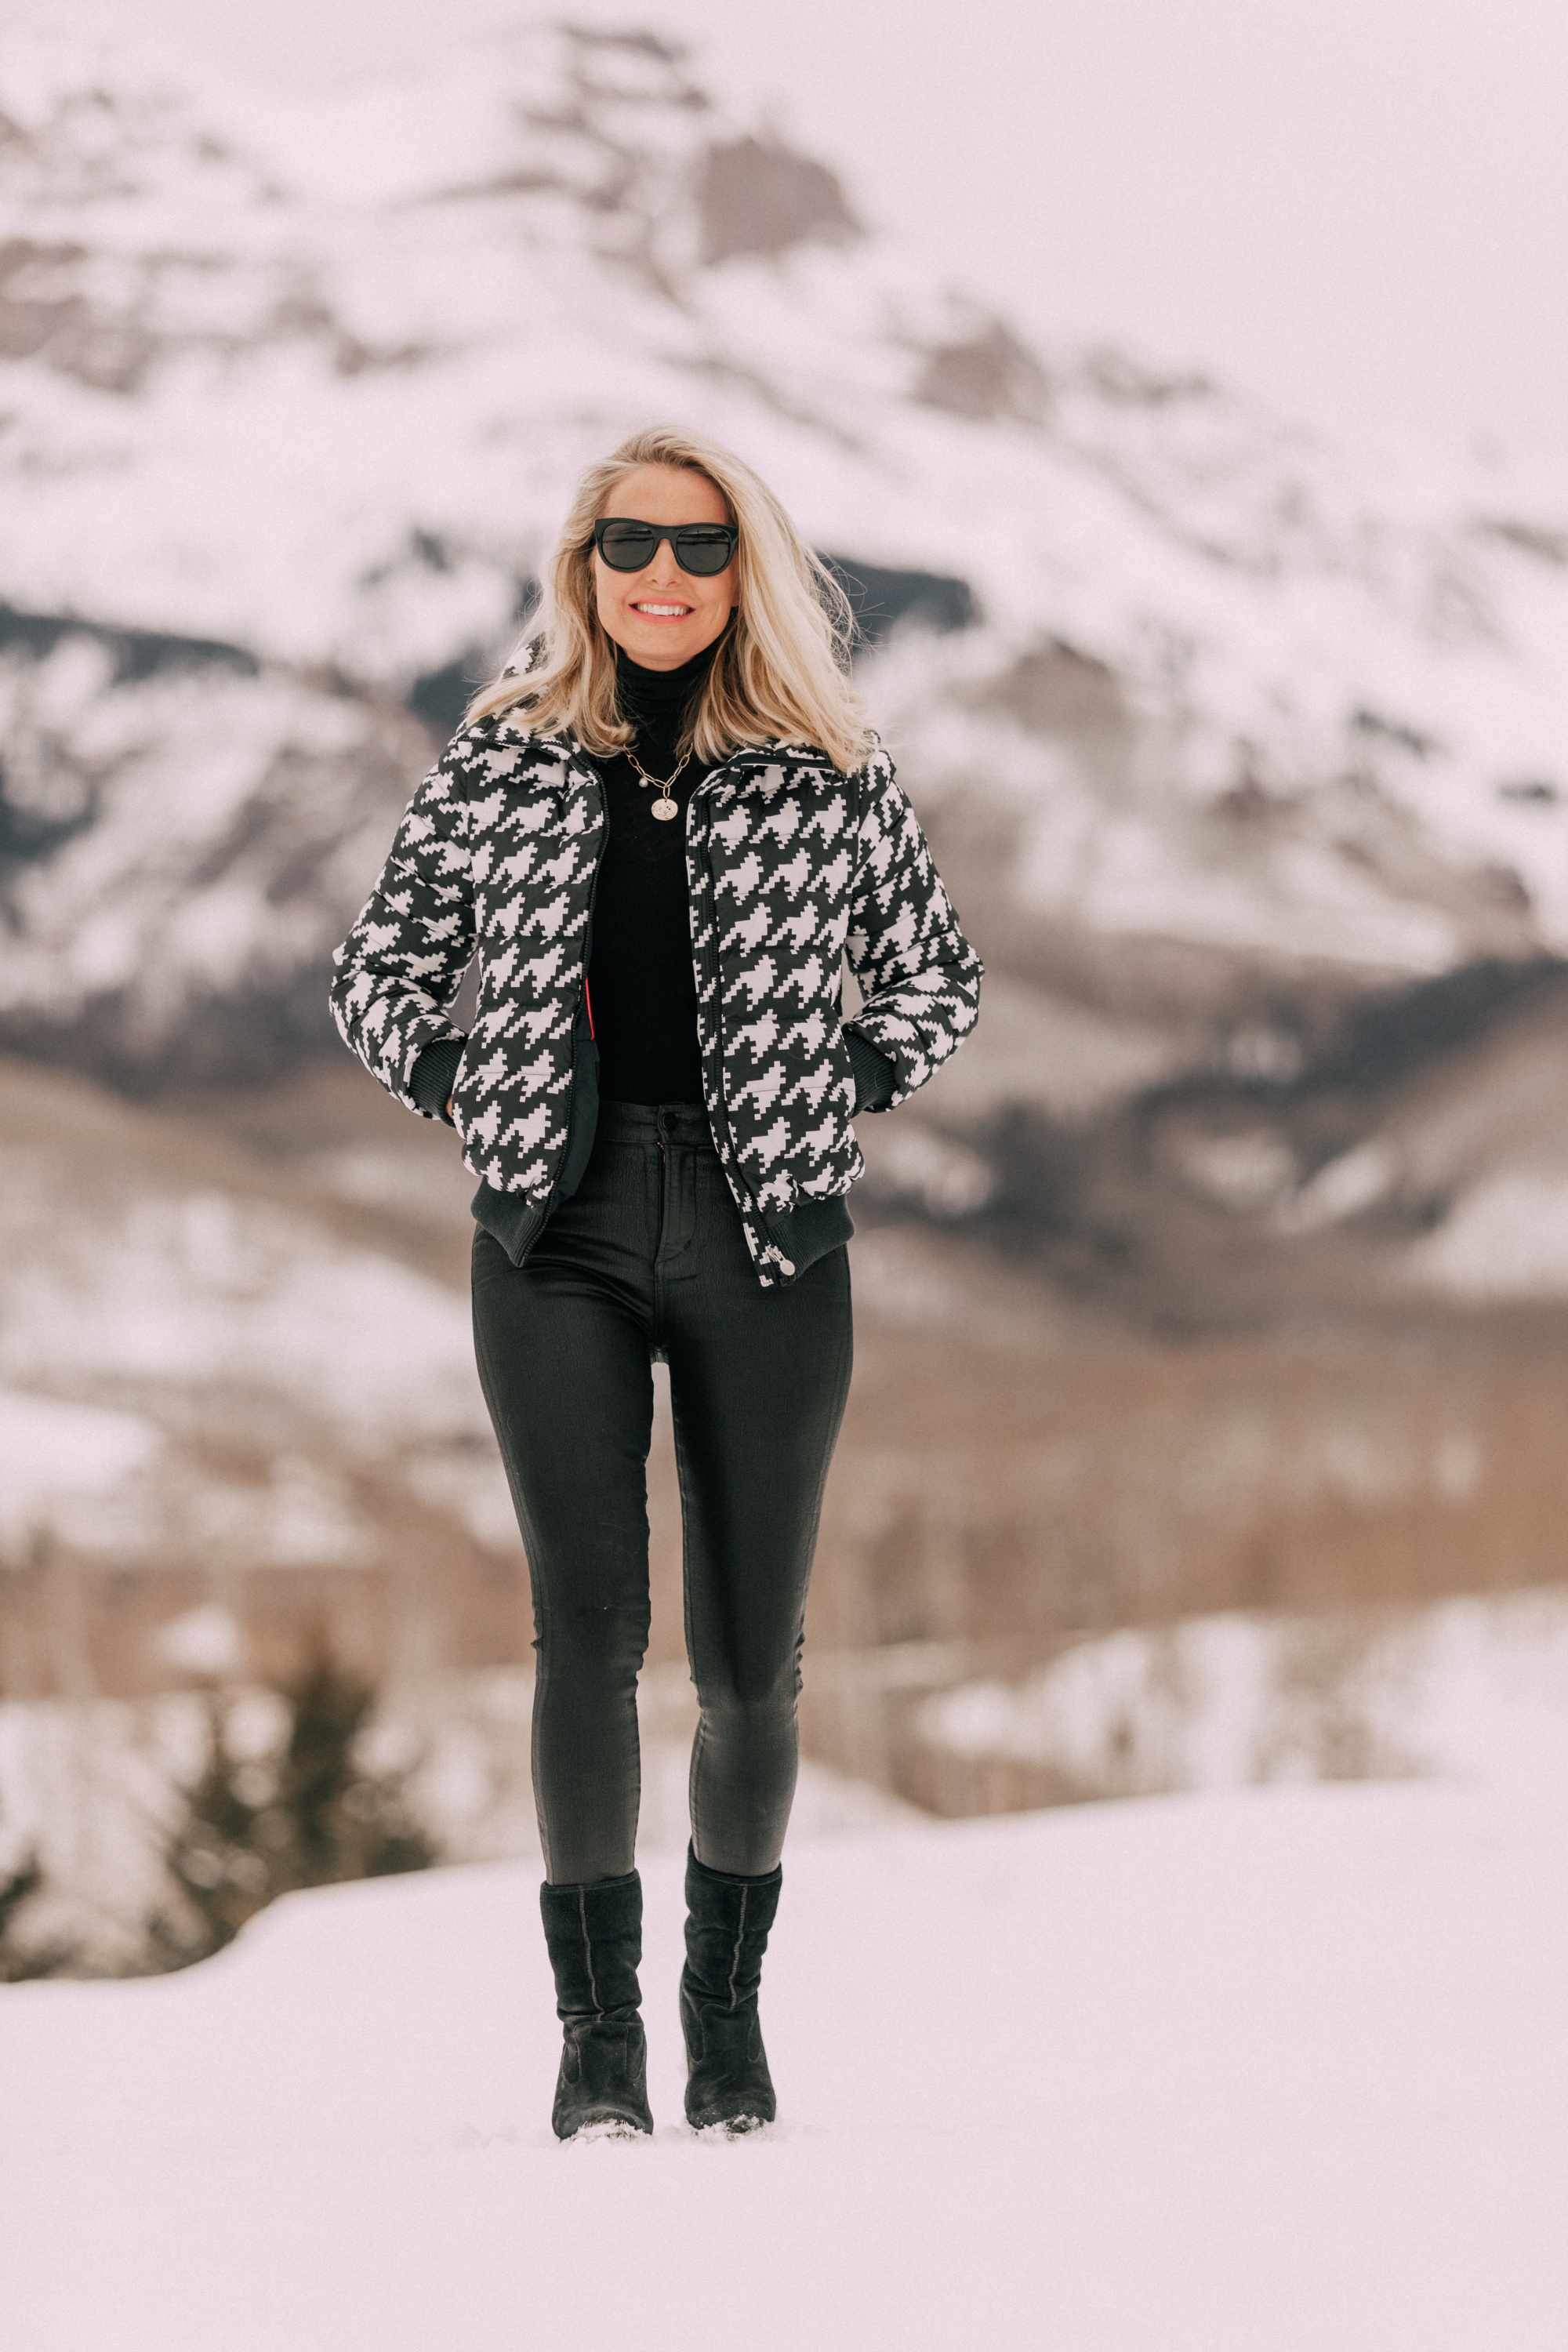 Chic Puffers, Fashion blogger Erin Busbee of BusbeeStyle.com wearing black Rocket leatherette Skinny Jeans by Citizens of Humanity with a black cashmere turtleneck sweater by Aqua, and a houndstooth puffer jacket by Perfect Moment from Shopbop in the snow in Telluride, CO